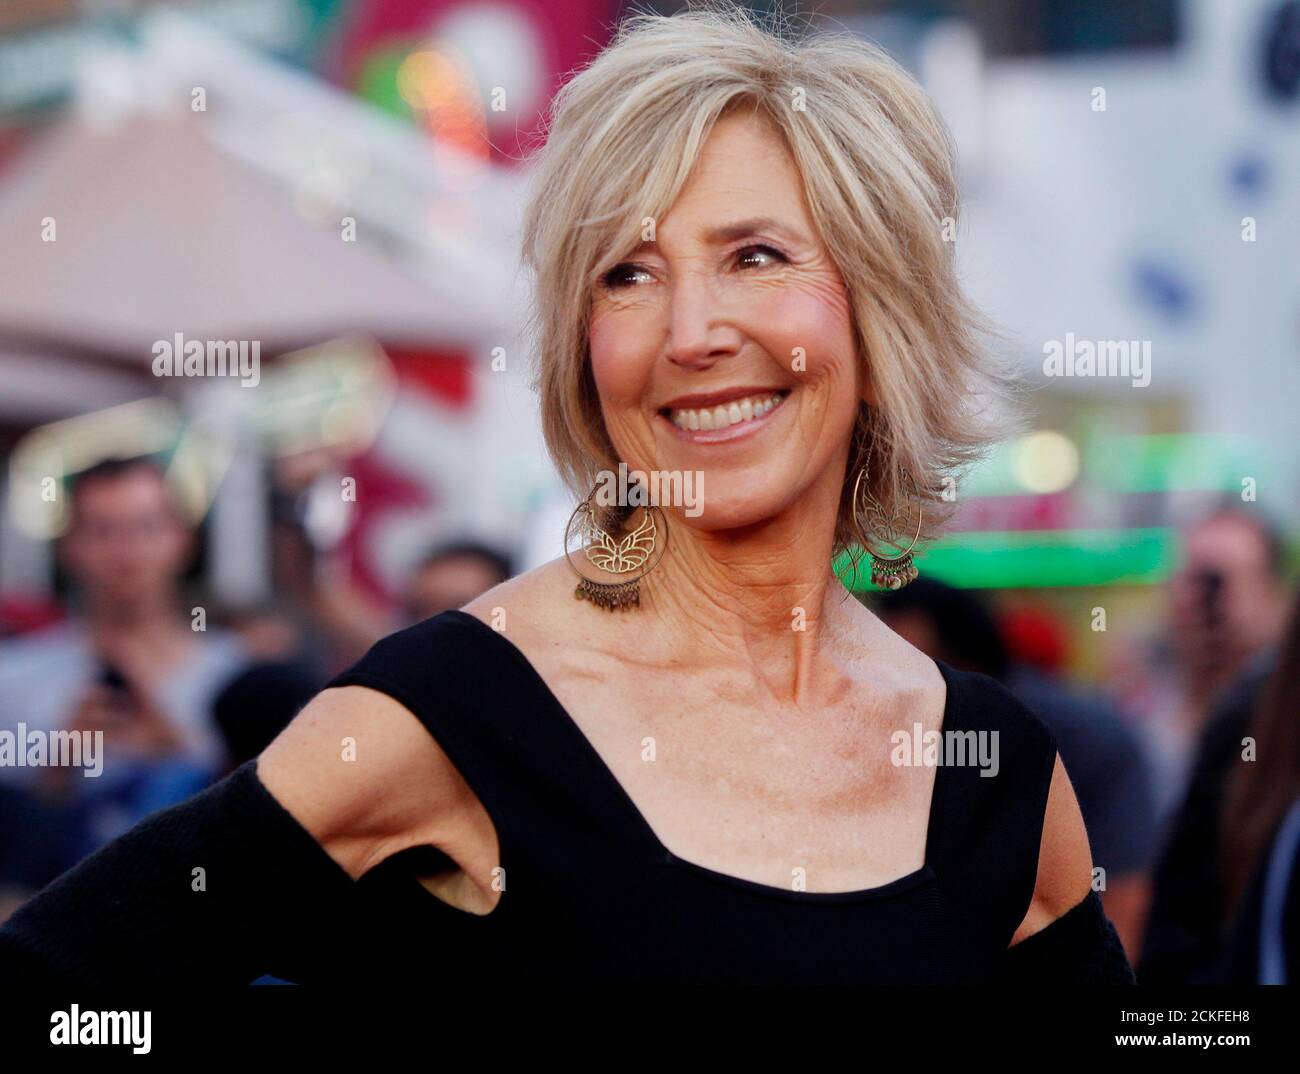 Actress Lin Shaye, one of the stars of the new film 'Insidious Chapter 2' poses at the film's premiere in Los Angeles, California September 10, 2013. REUTERS/Fred Prouser (UNITED STATES) Stock Photo